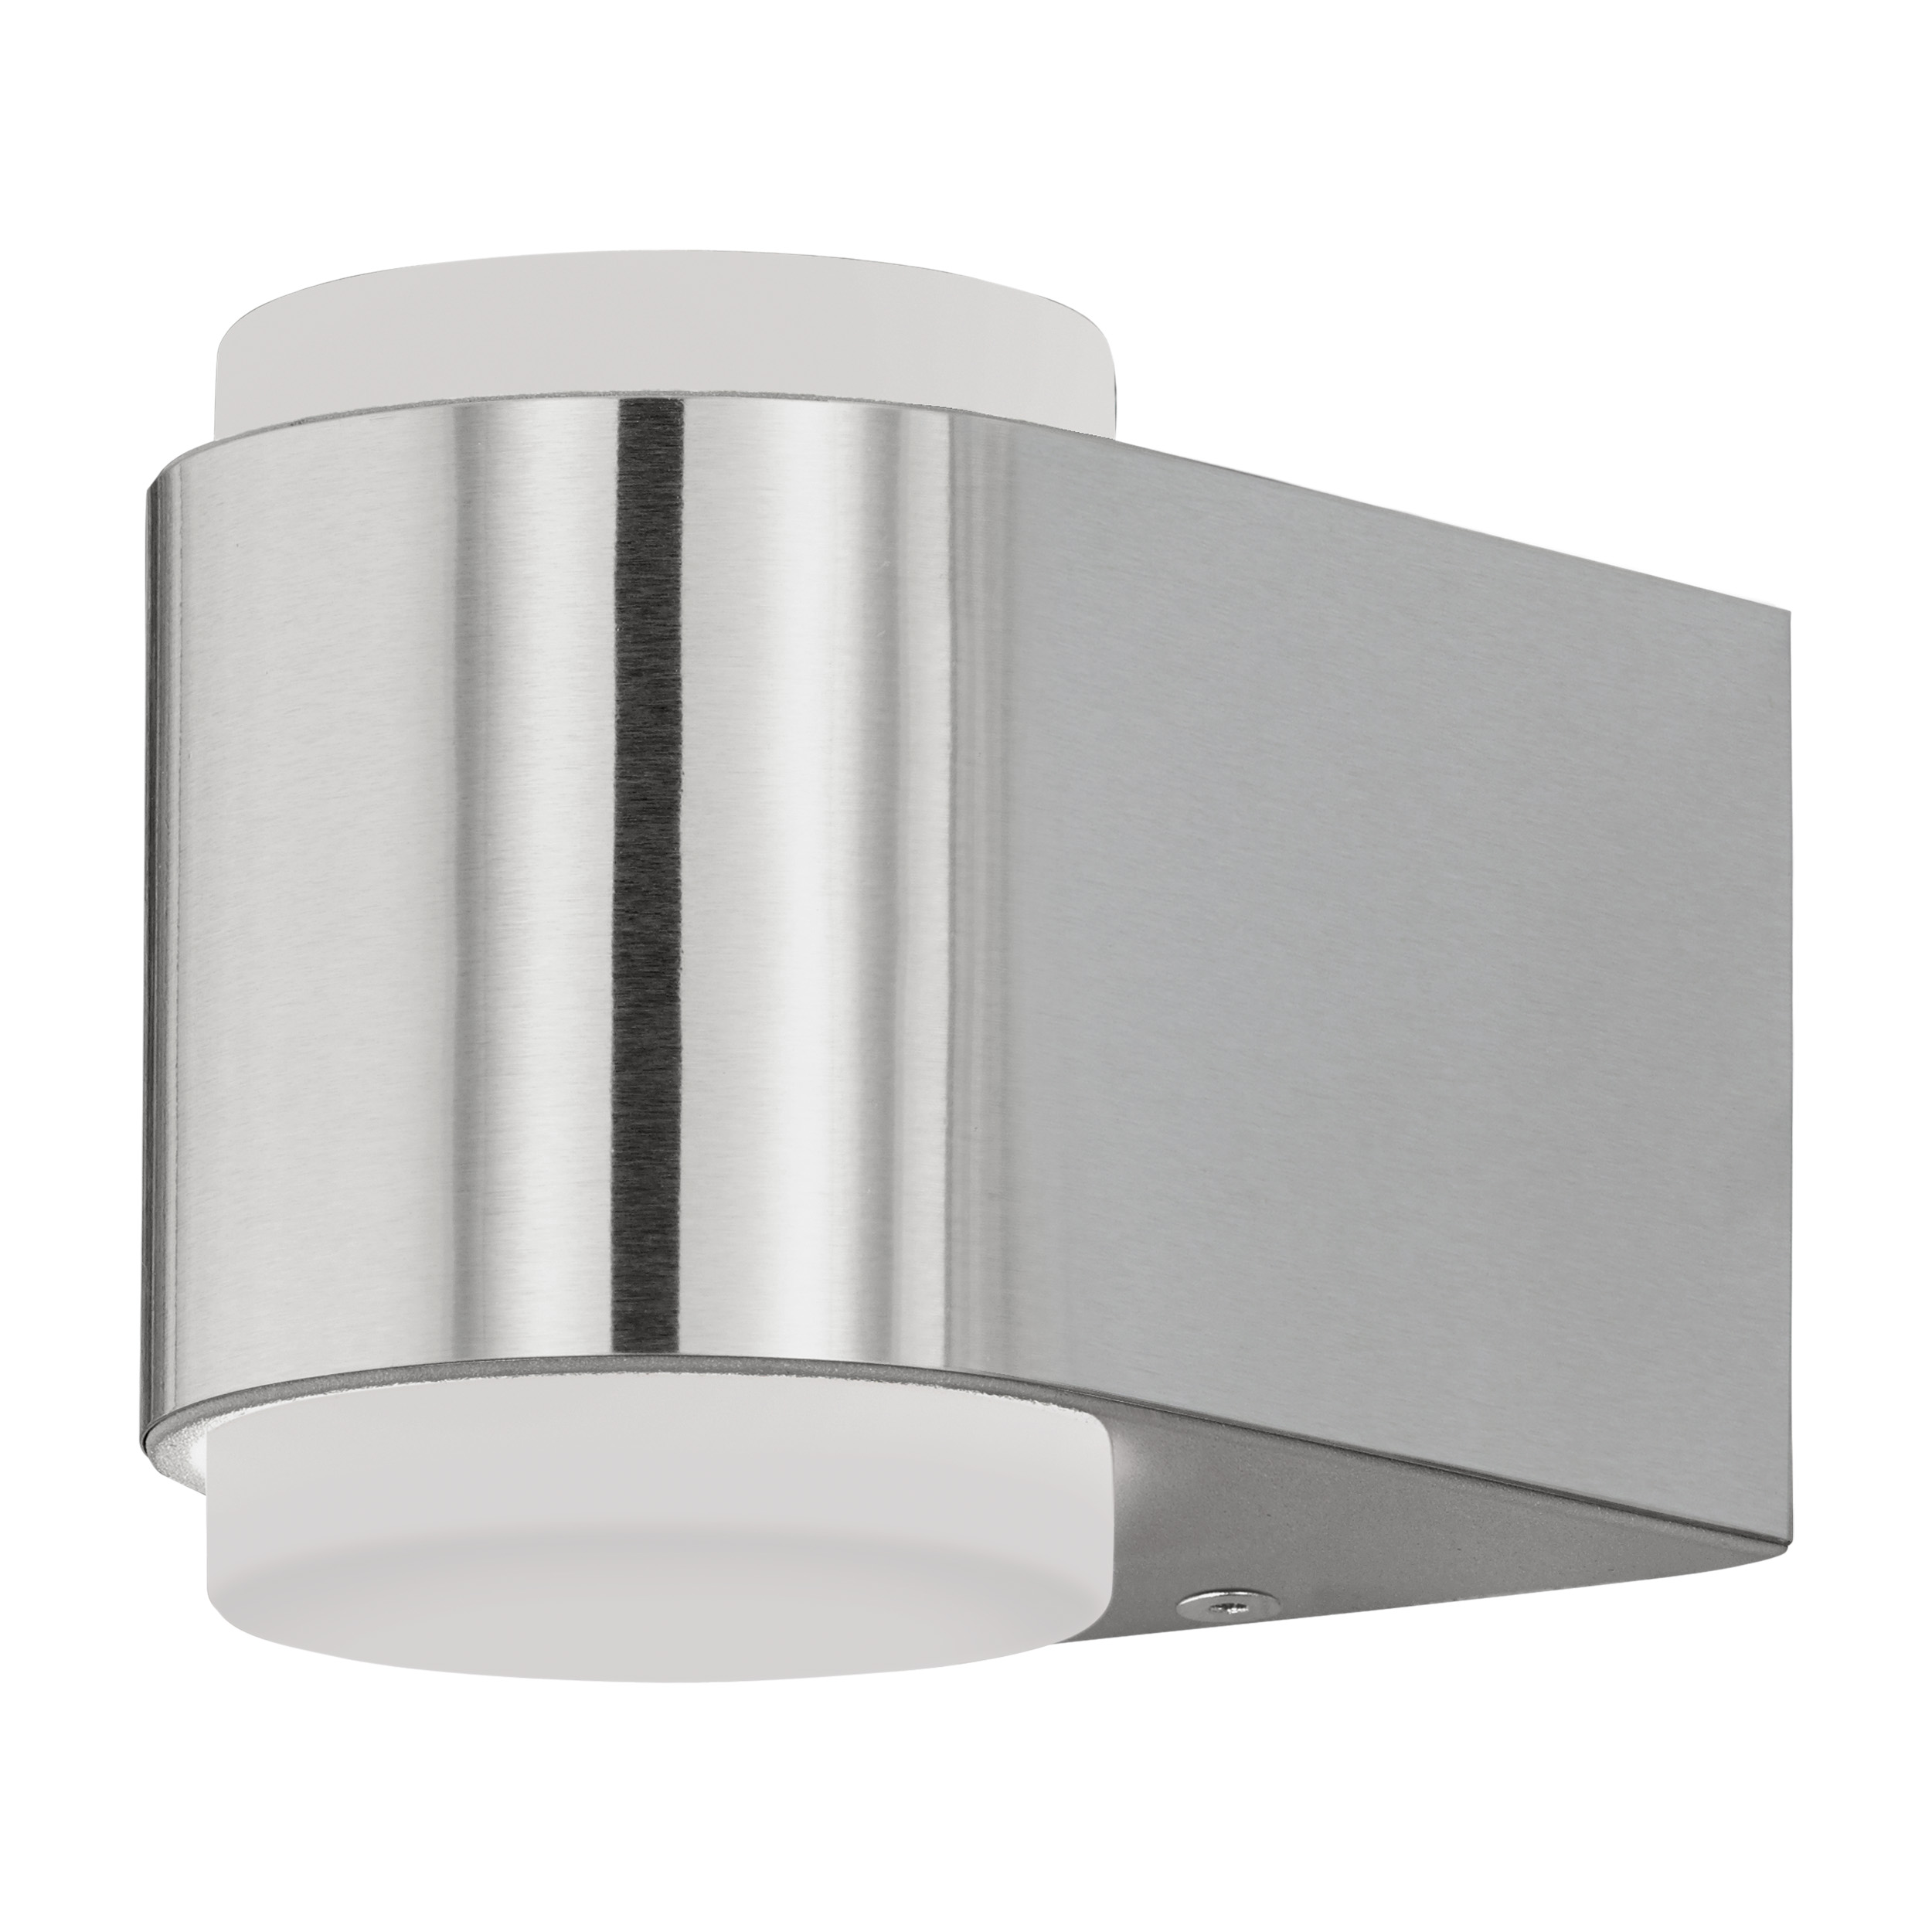 EGLO BRIONES LED wall light